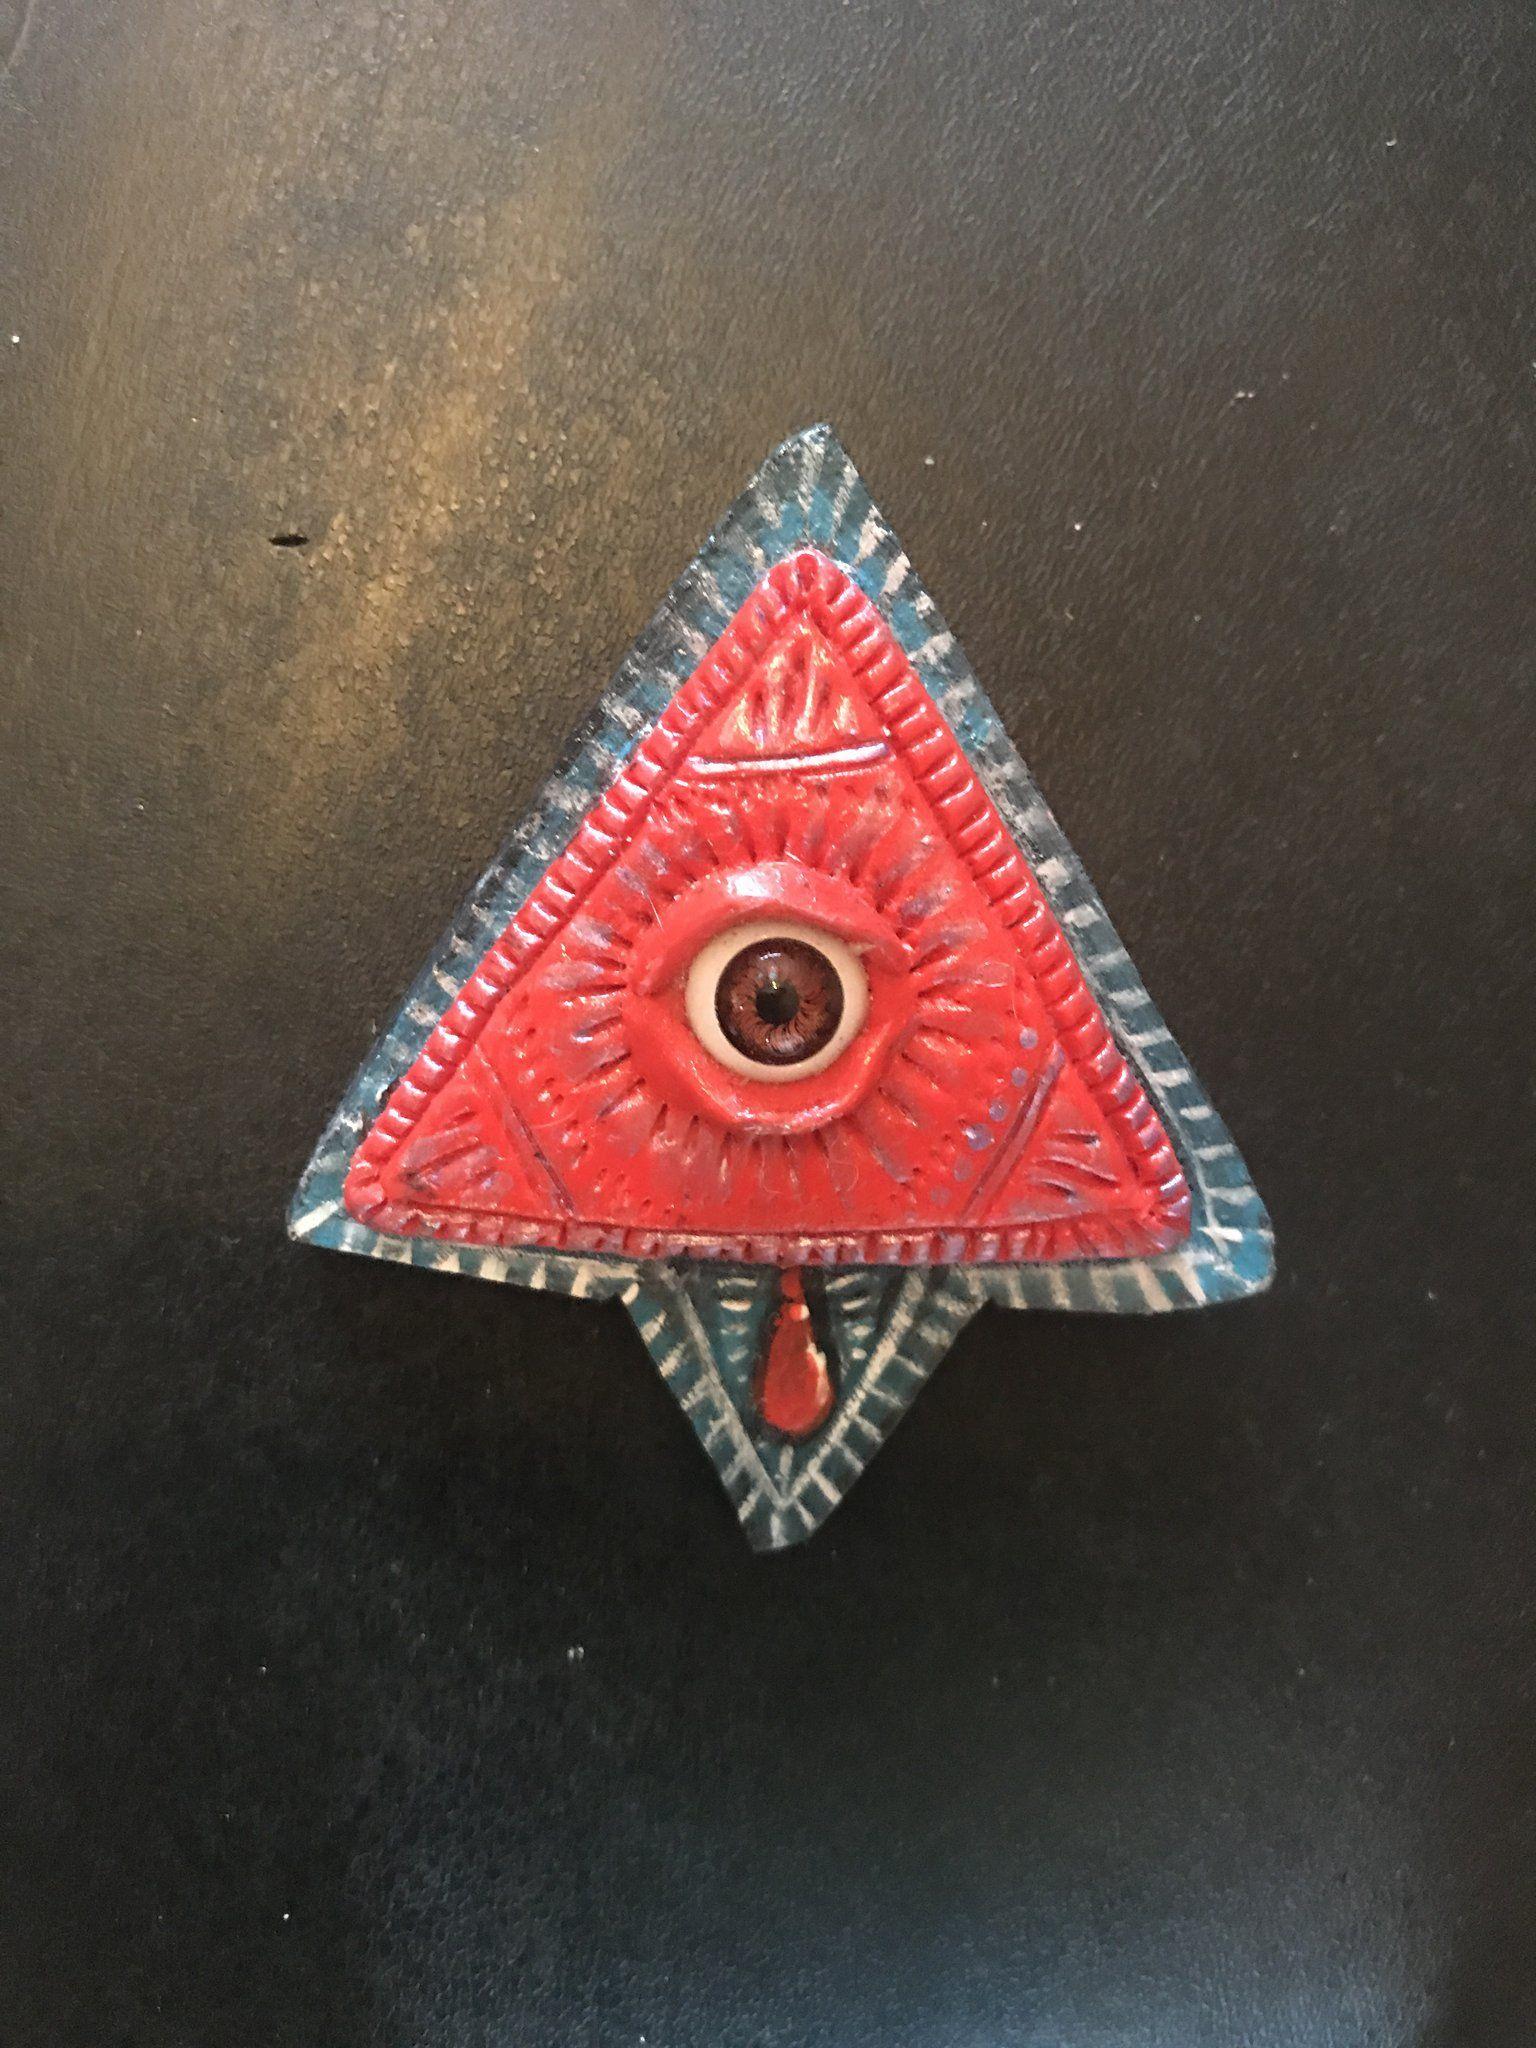 Silver with Red Triangle Logo - Red Triangle Brooch with All Seeing Eye – Cult Party NYC